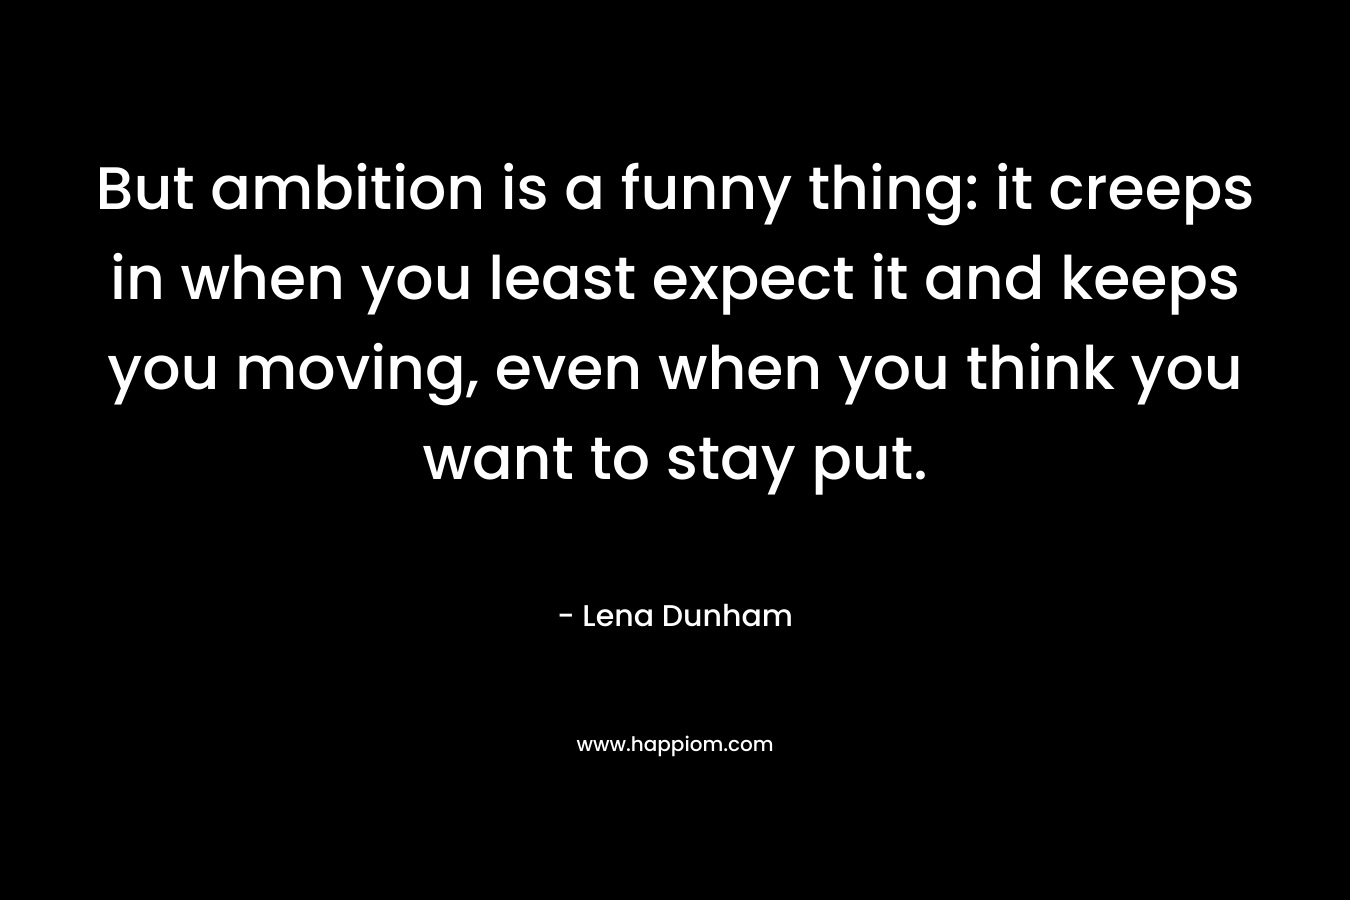 But ambition is a funny thing: it creeps in when you least expect it and keeps you moving, even when you think you want to stay put. – Lena Dunham